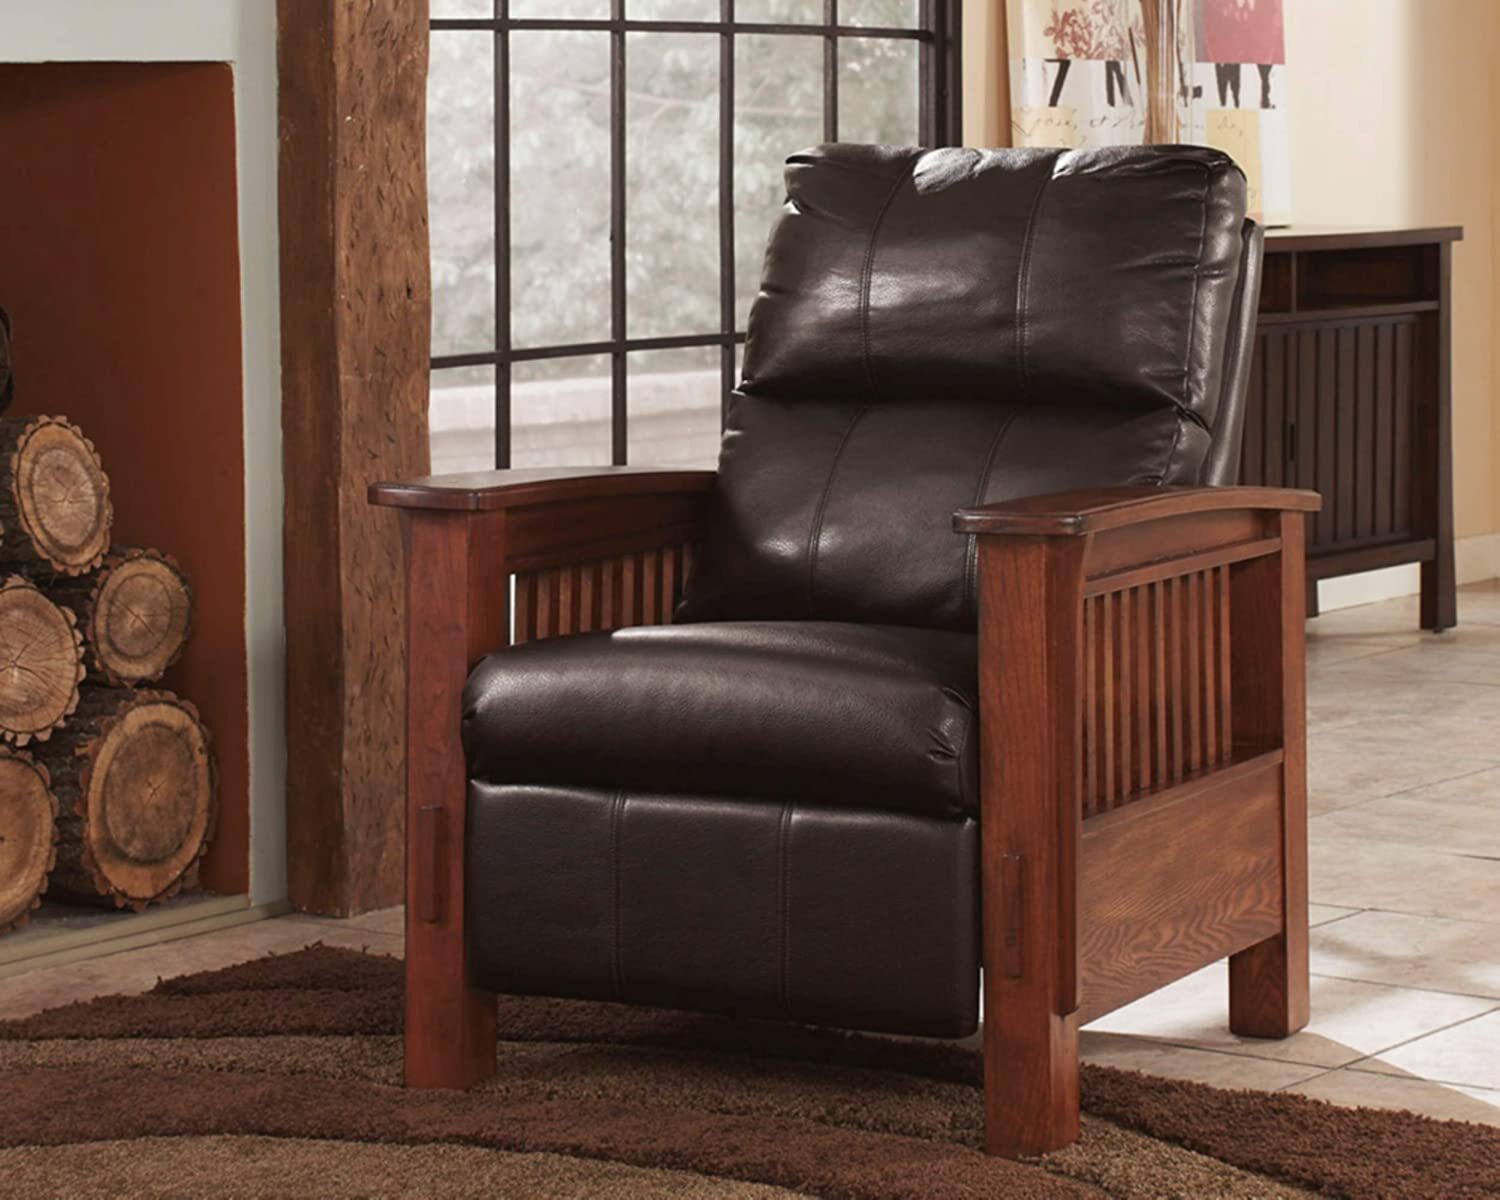 Classic Faux Leather and Wood Recliner Chair